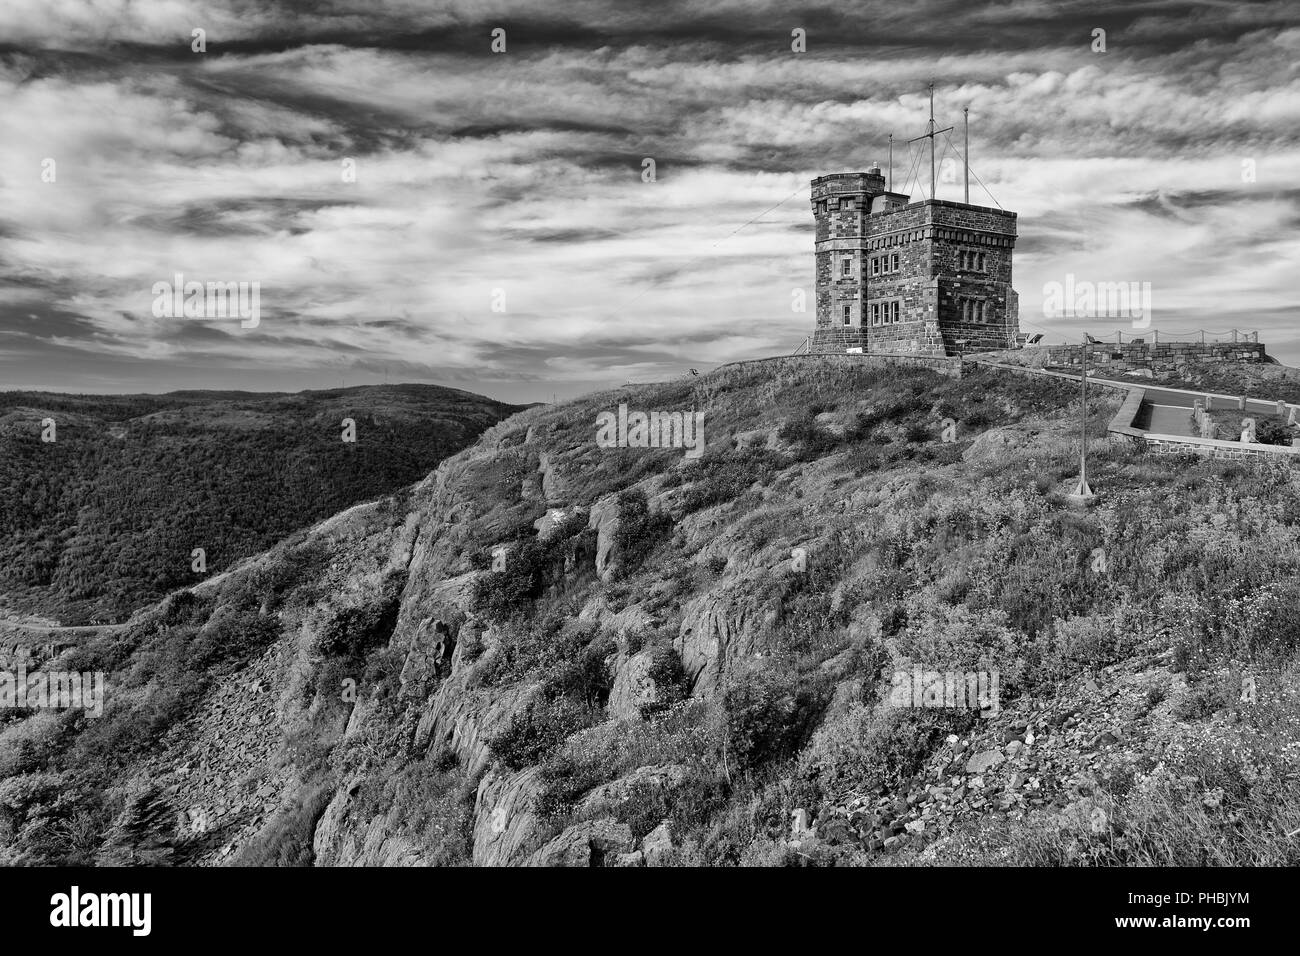 Historic Cabot Tower at Signal Hill in St. John's, Newfoundland and Labrador Stock Photo